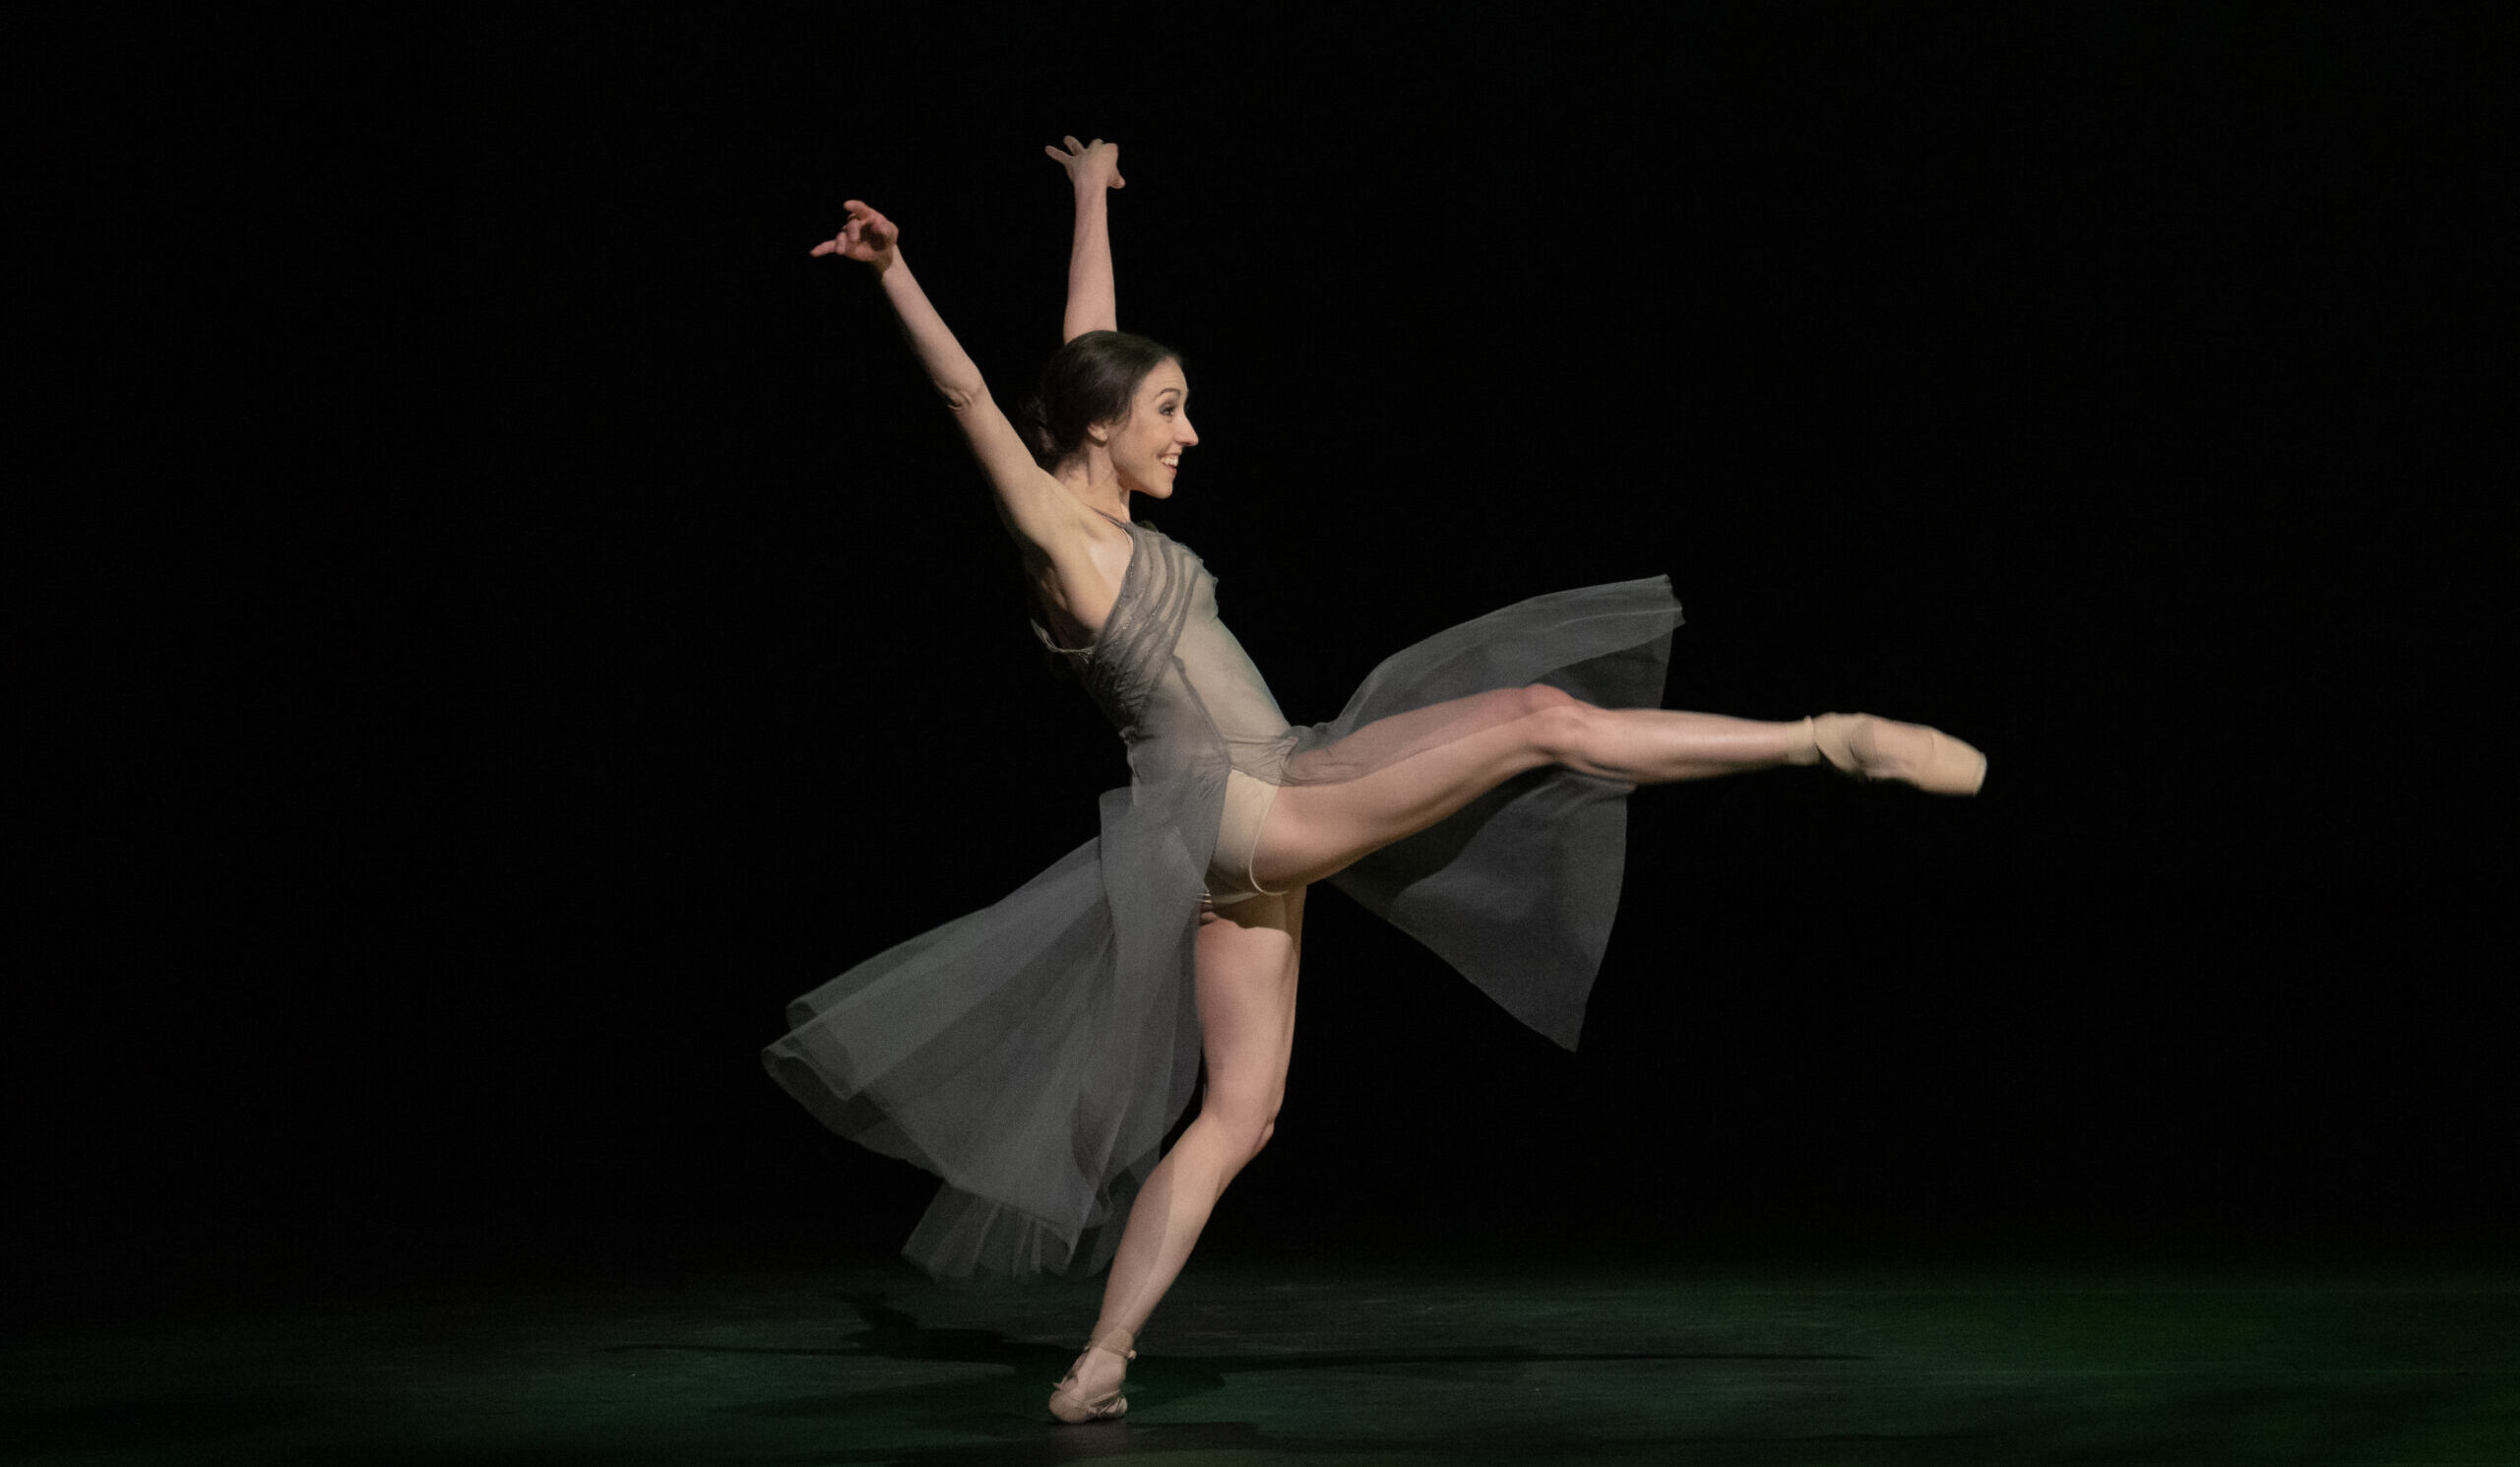 Ballet news. On a dark stage, Isabella Gasparini smiles as she does an attitude devant in a shallow lunge, arms lifted up in a "V" overhead. She wears a sheer taupe dress and pointe shoes.